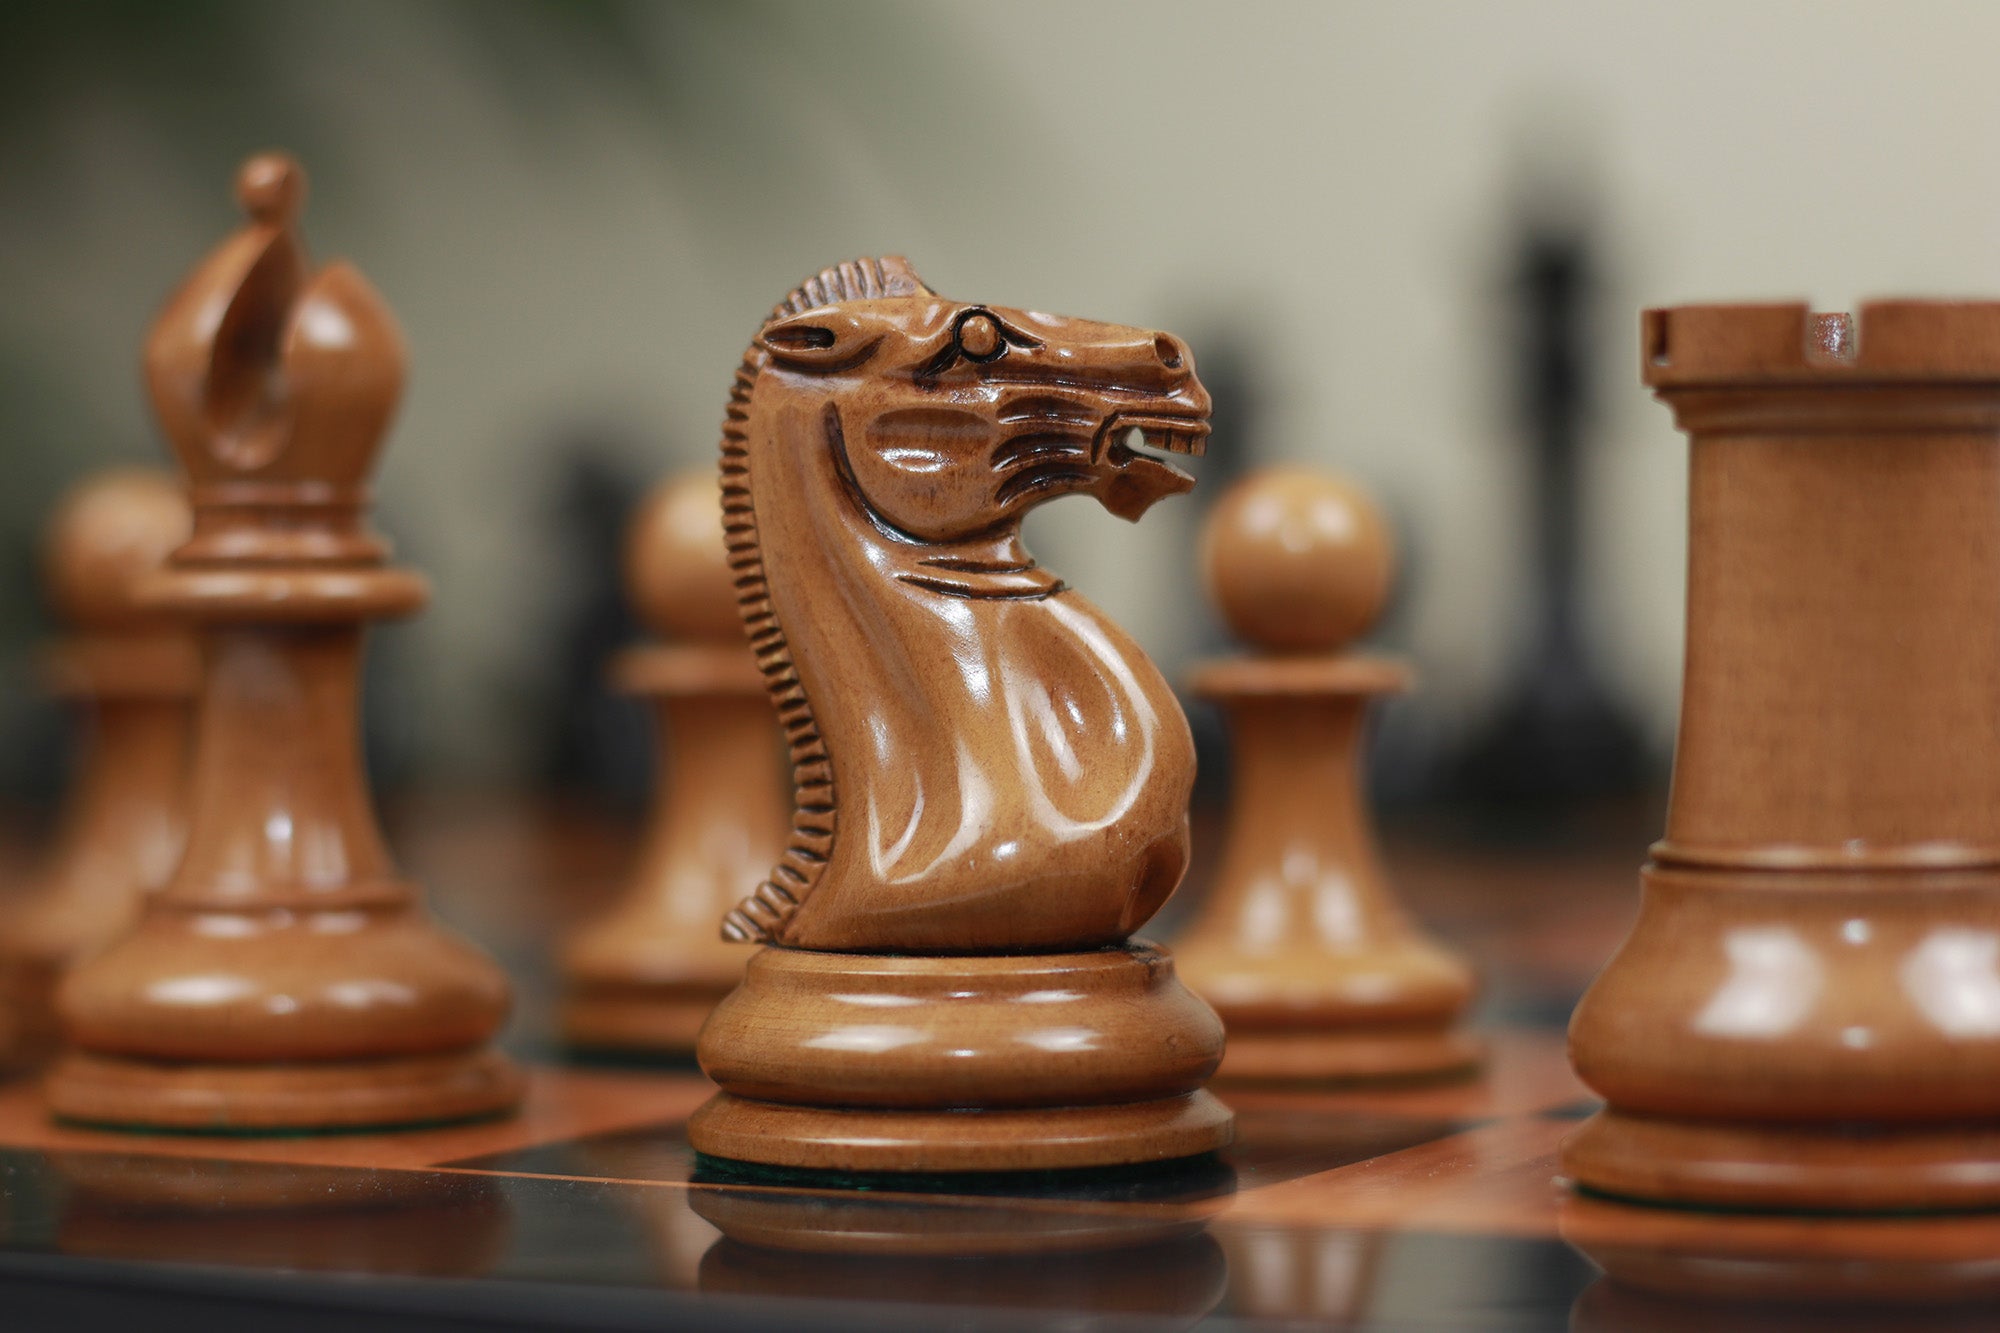 Original Reproduction Nathaniel 1849 Vintage 4.4" Chess Pieces in Distressed Boxwood & Ebony